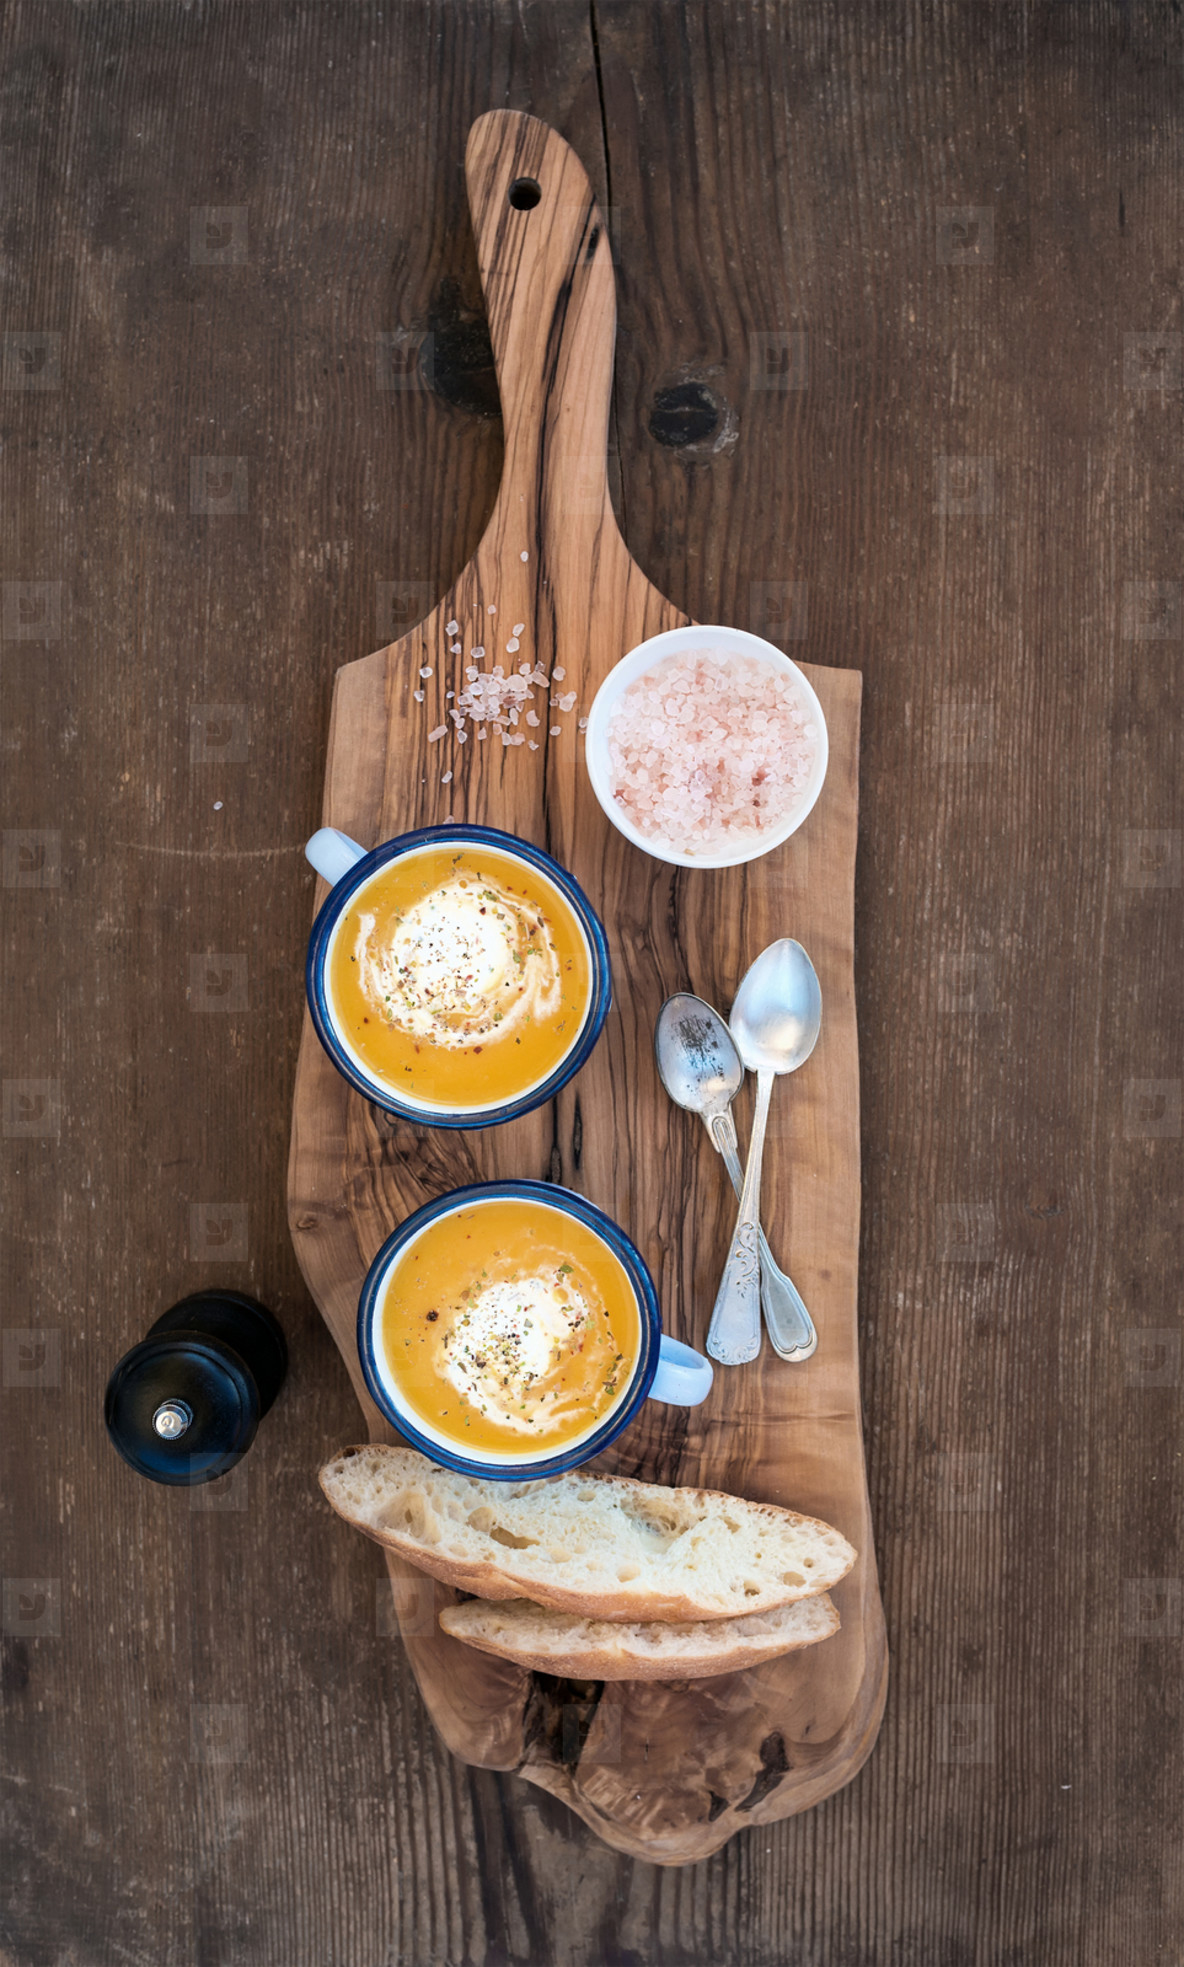 Homemade pumpkin cream soup in enamel mugs with herbs and fresh bread slices on olive serving board over rustic wooden background